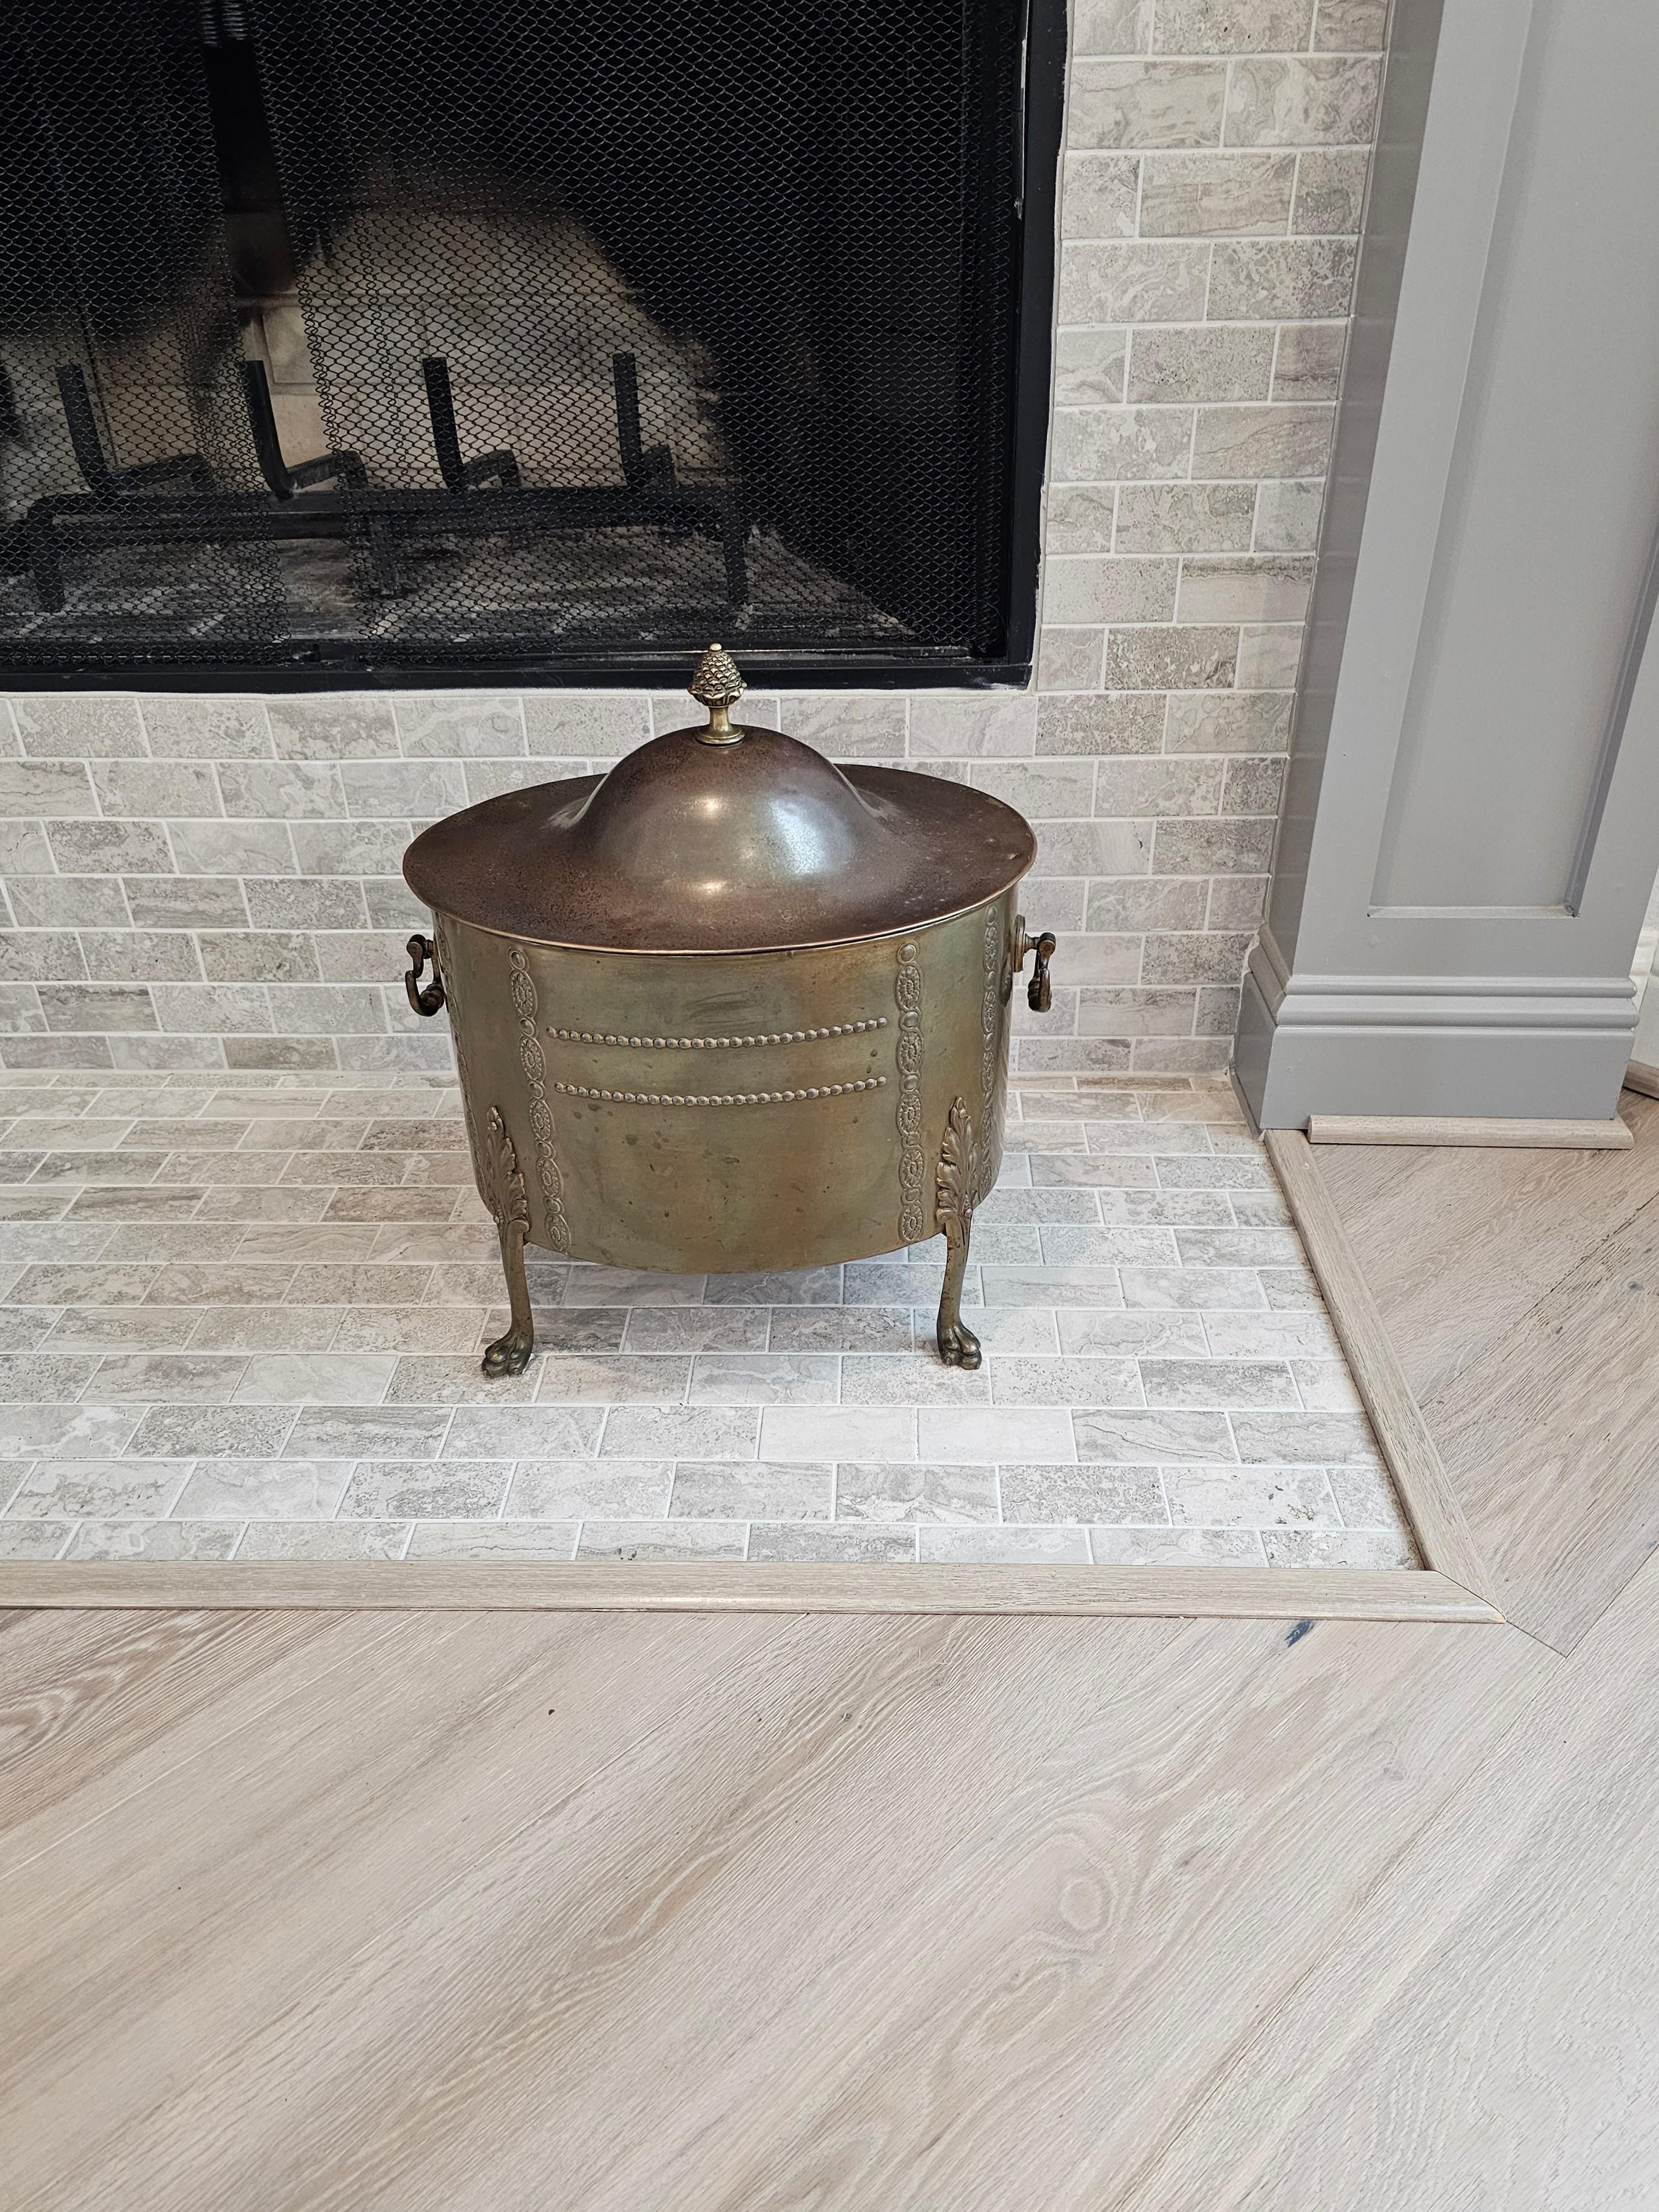 A charming Edwardian period brass lidded fireside coal scuttle (today it makes for a wonderful and functional fireplace accessory - kindling wood bin - hod - indoor planter)

Born in England in the early 20th century, featuring an oval lid